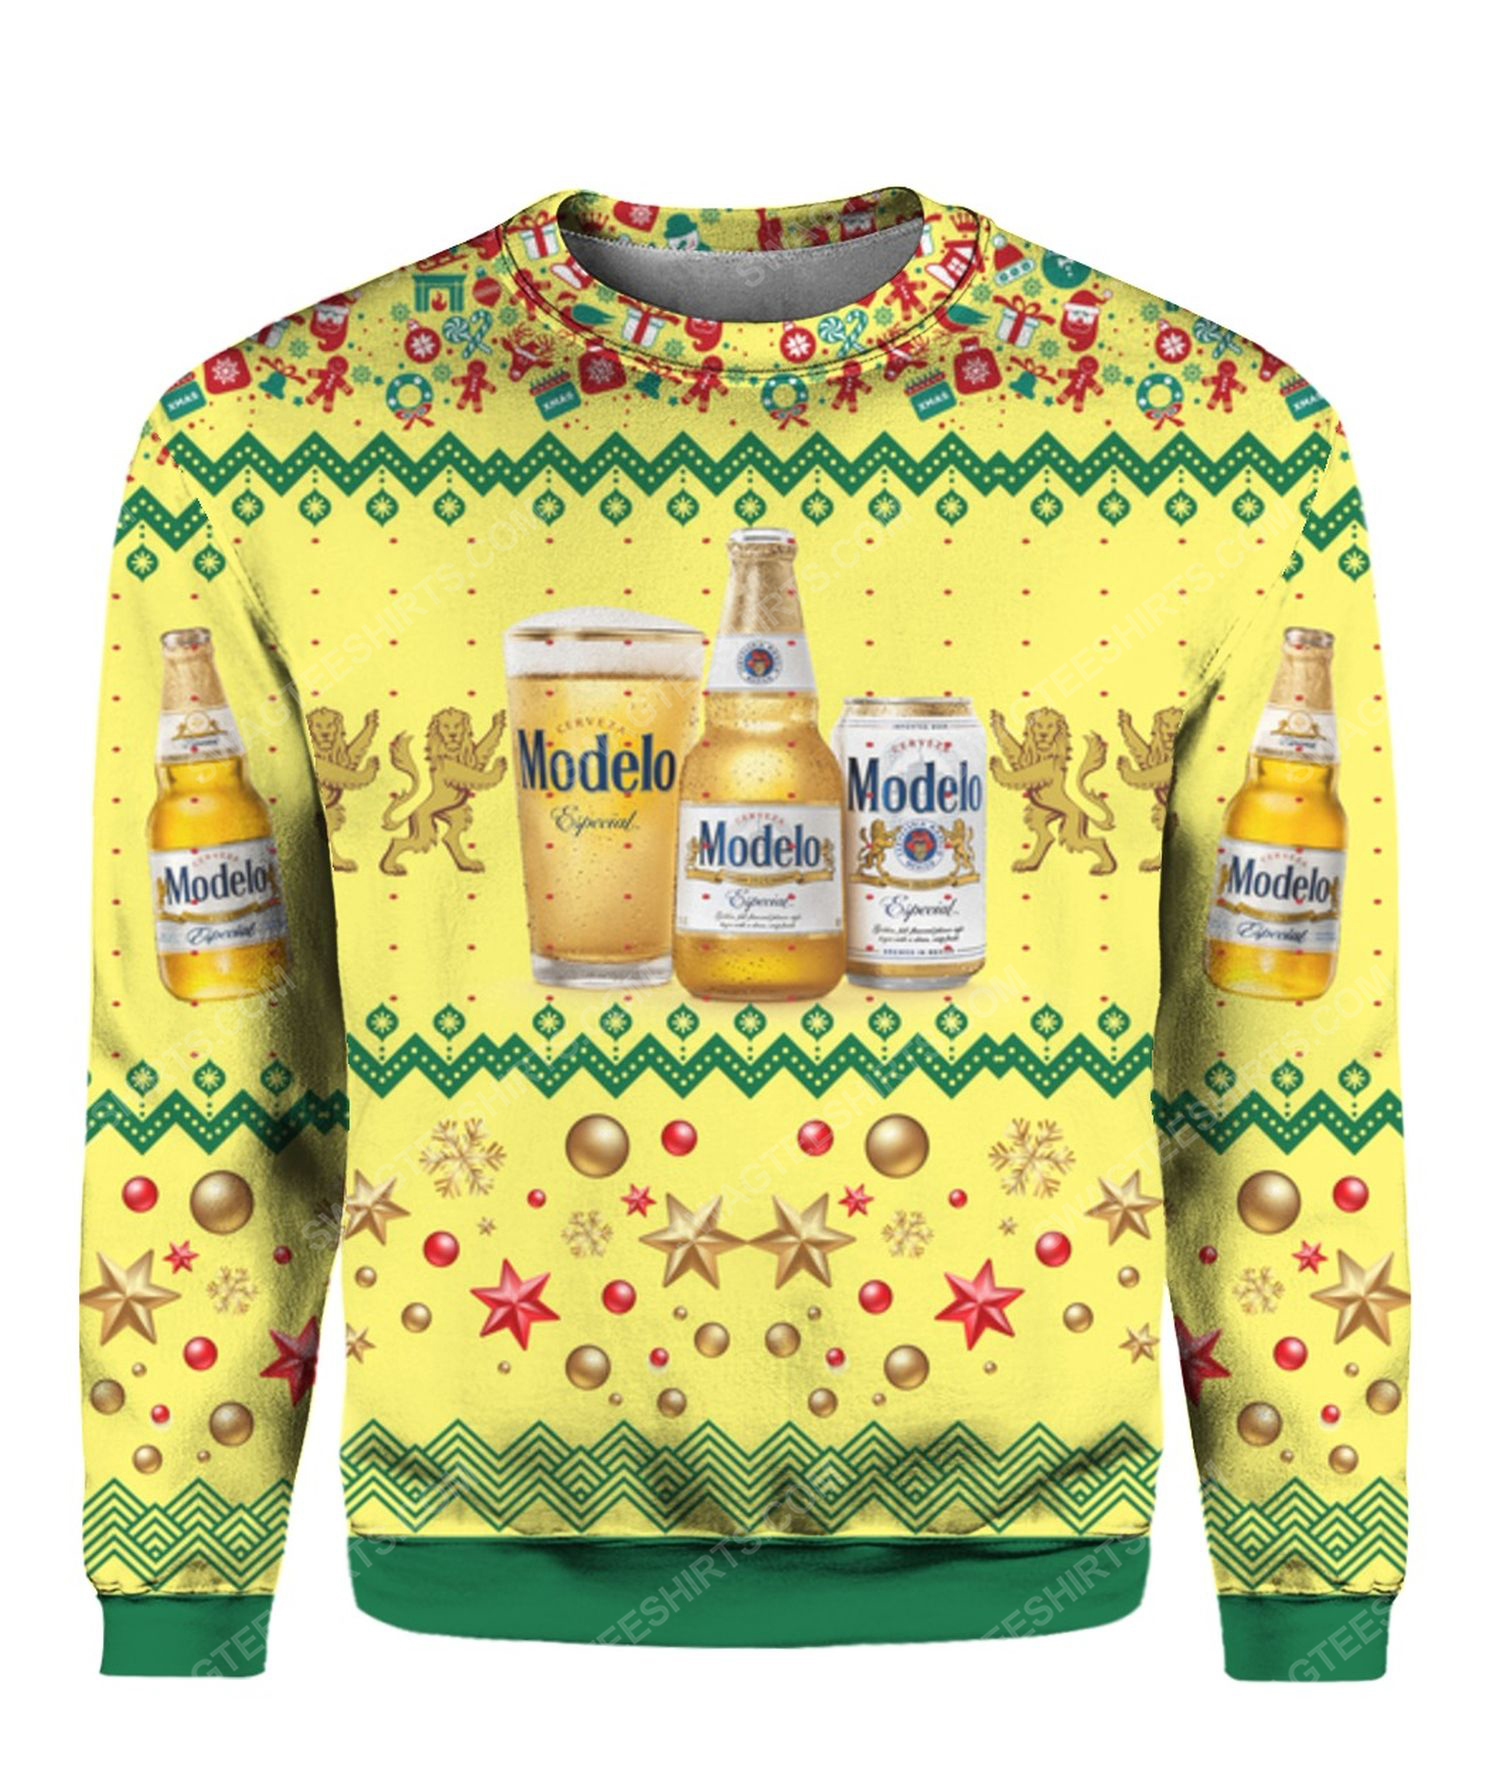 Modelo especial beer bottles all over print ugly christmas sweater